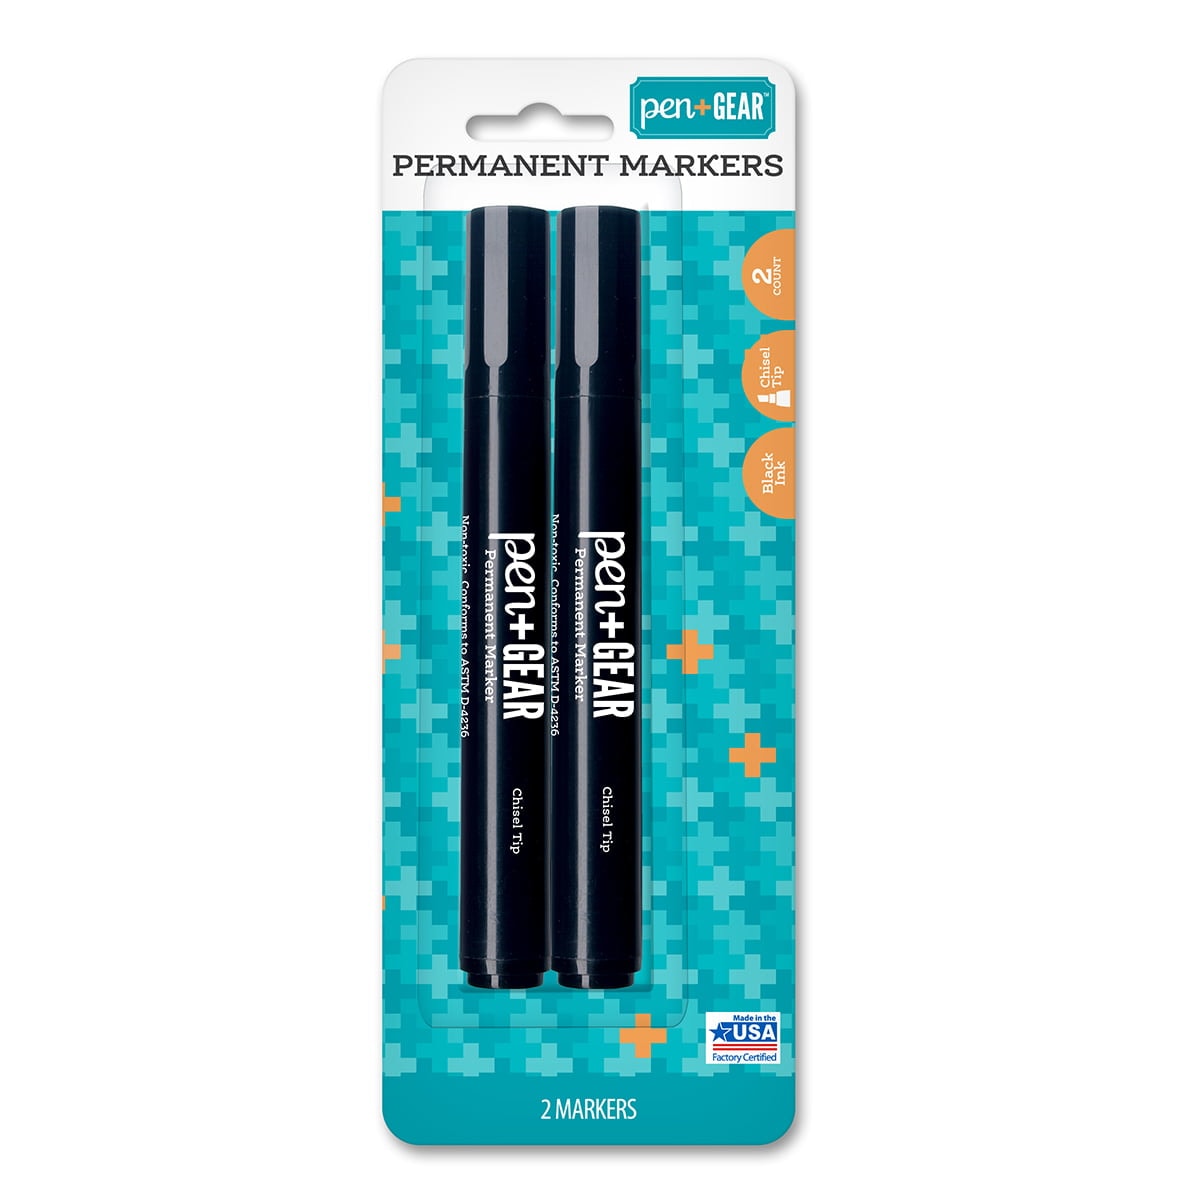 2 Count Pen - Gear Permanent Markers - Black - DroneUp Delivery